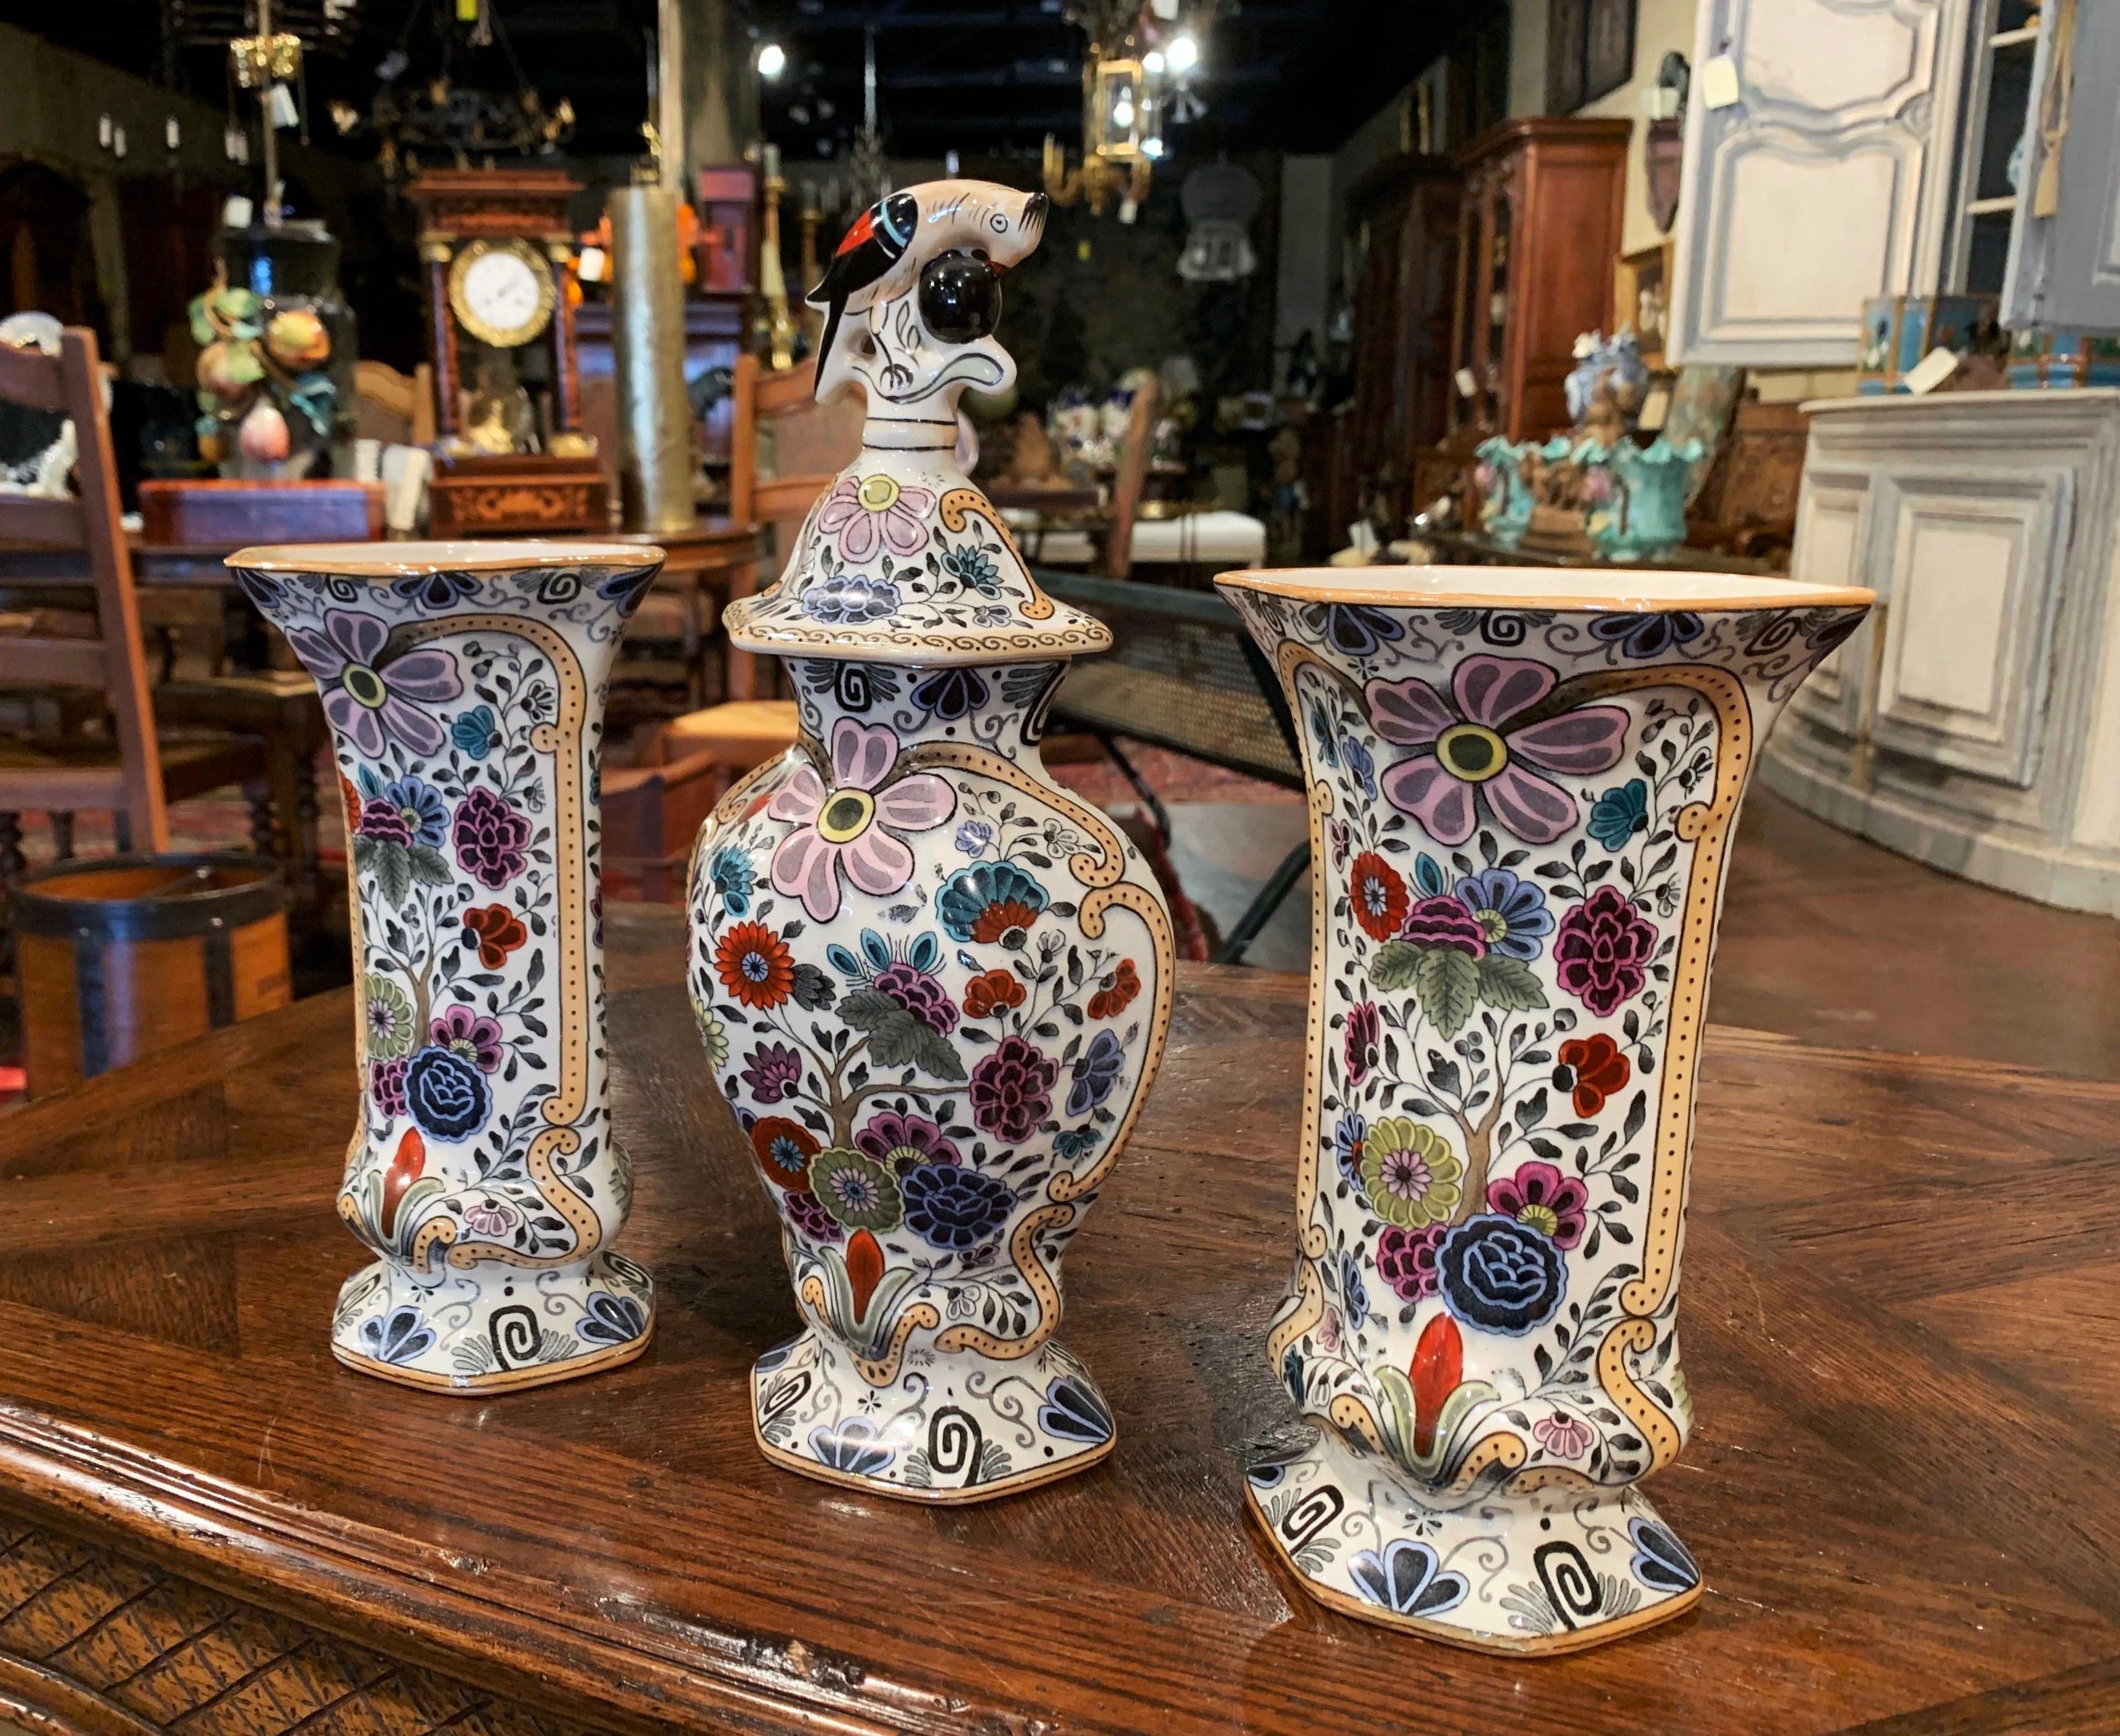 Created in France circa 1890, the three porcelain vases include a pair of trumpet vases and a matching jar with lid decorated with a bird eating a apple in the manner of Delft. All three colorful pieces are hand painted with floral motifs in the